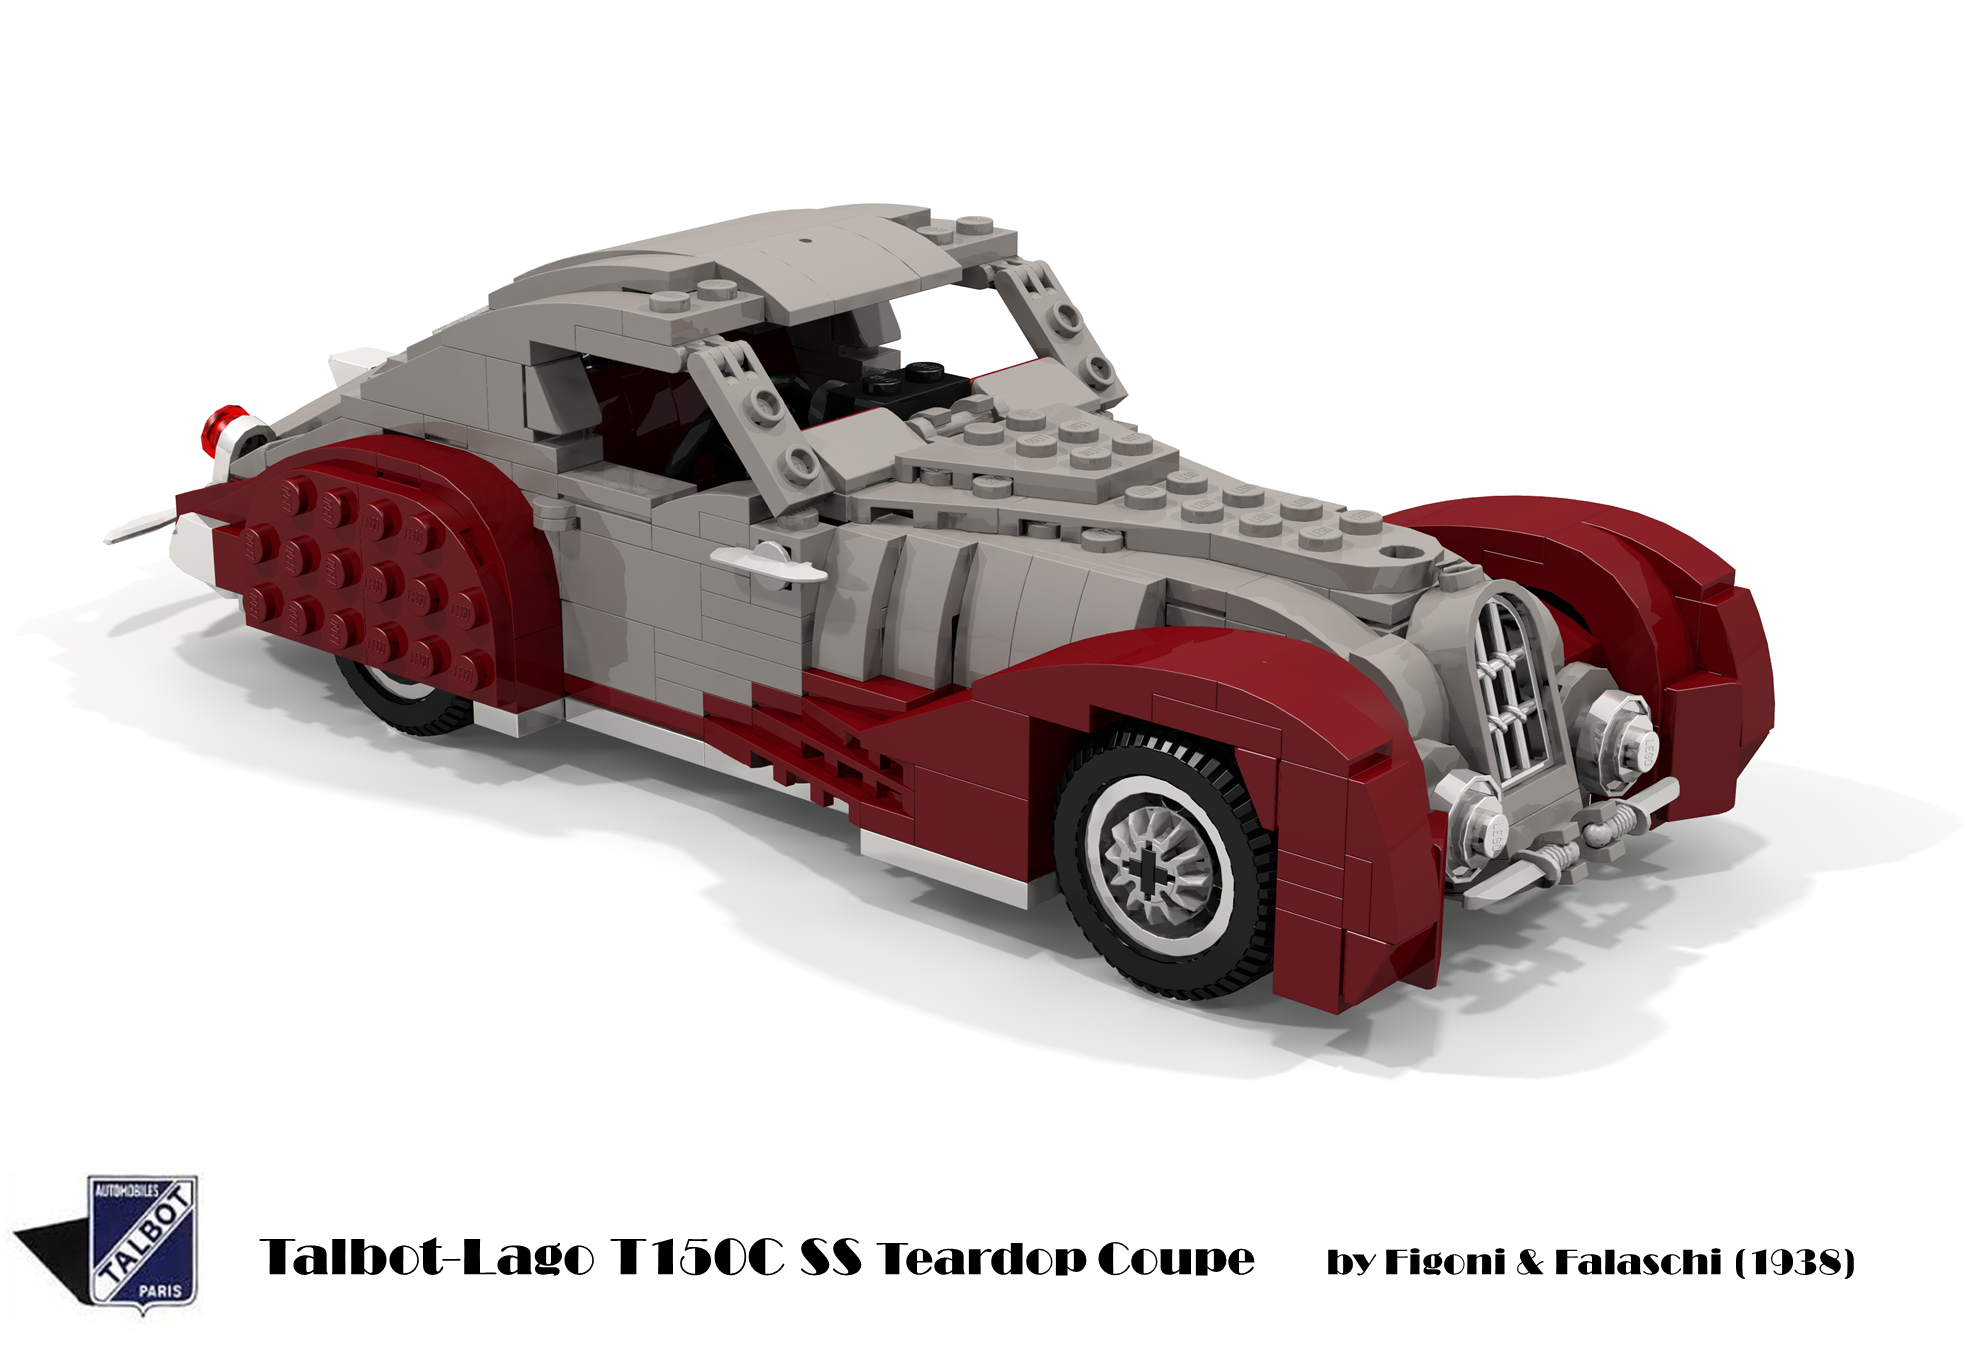 1938_talbot-lago_t150c_ss_teardrop_coupe.png